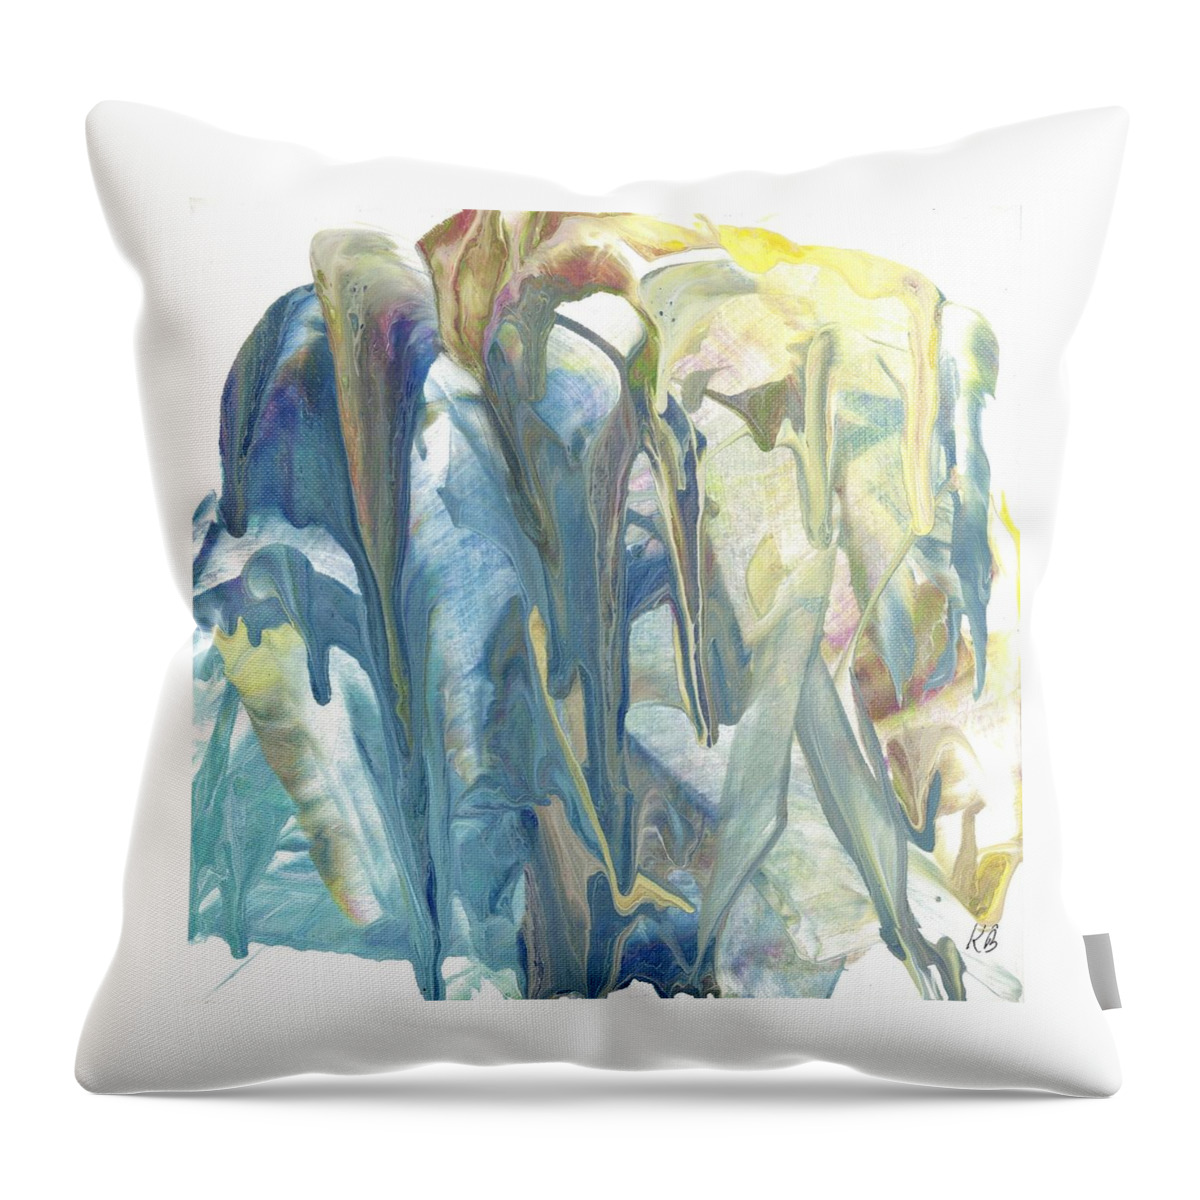 Flowers Throw Pillow featuring the painting Calla Lilies by Katy Bishop